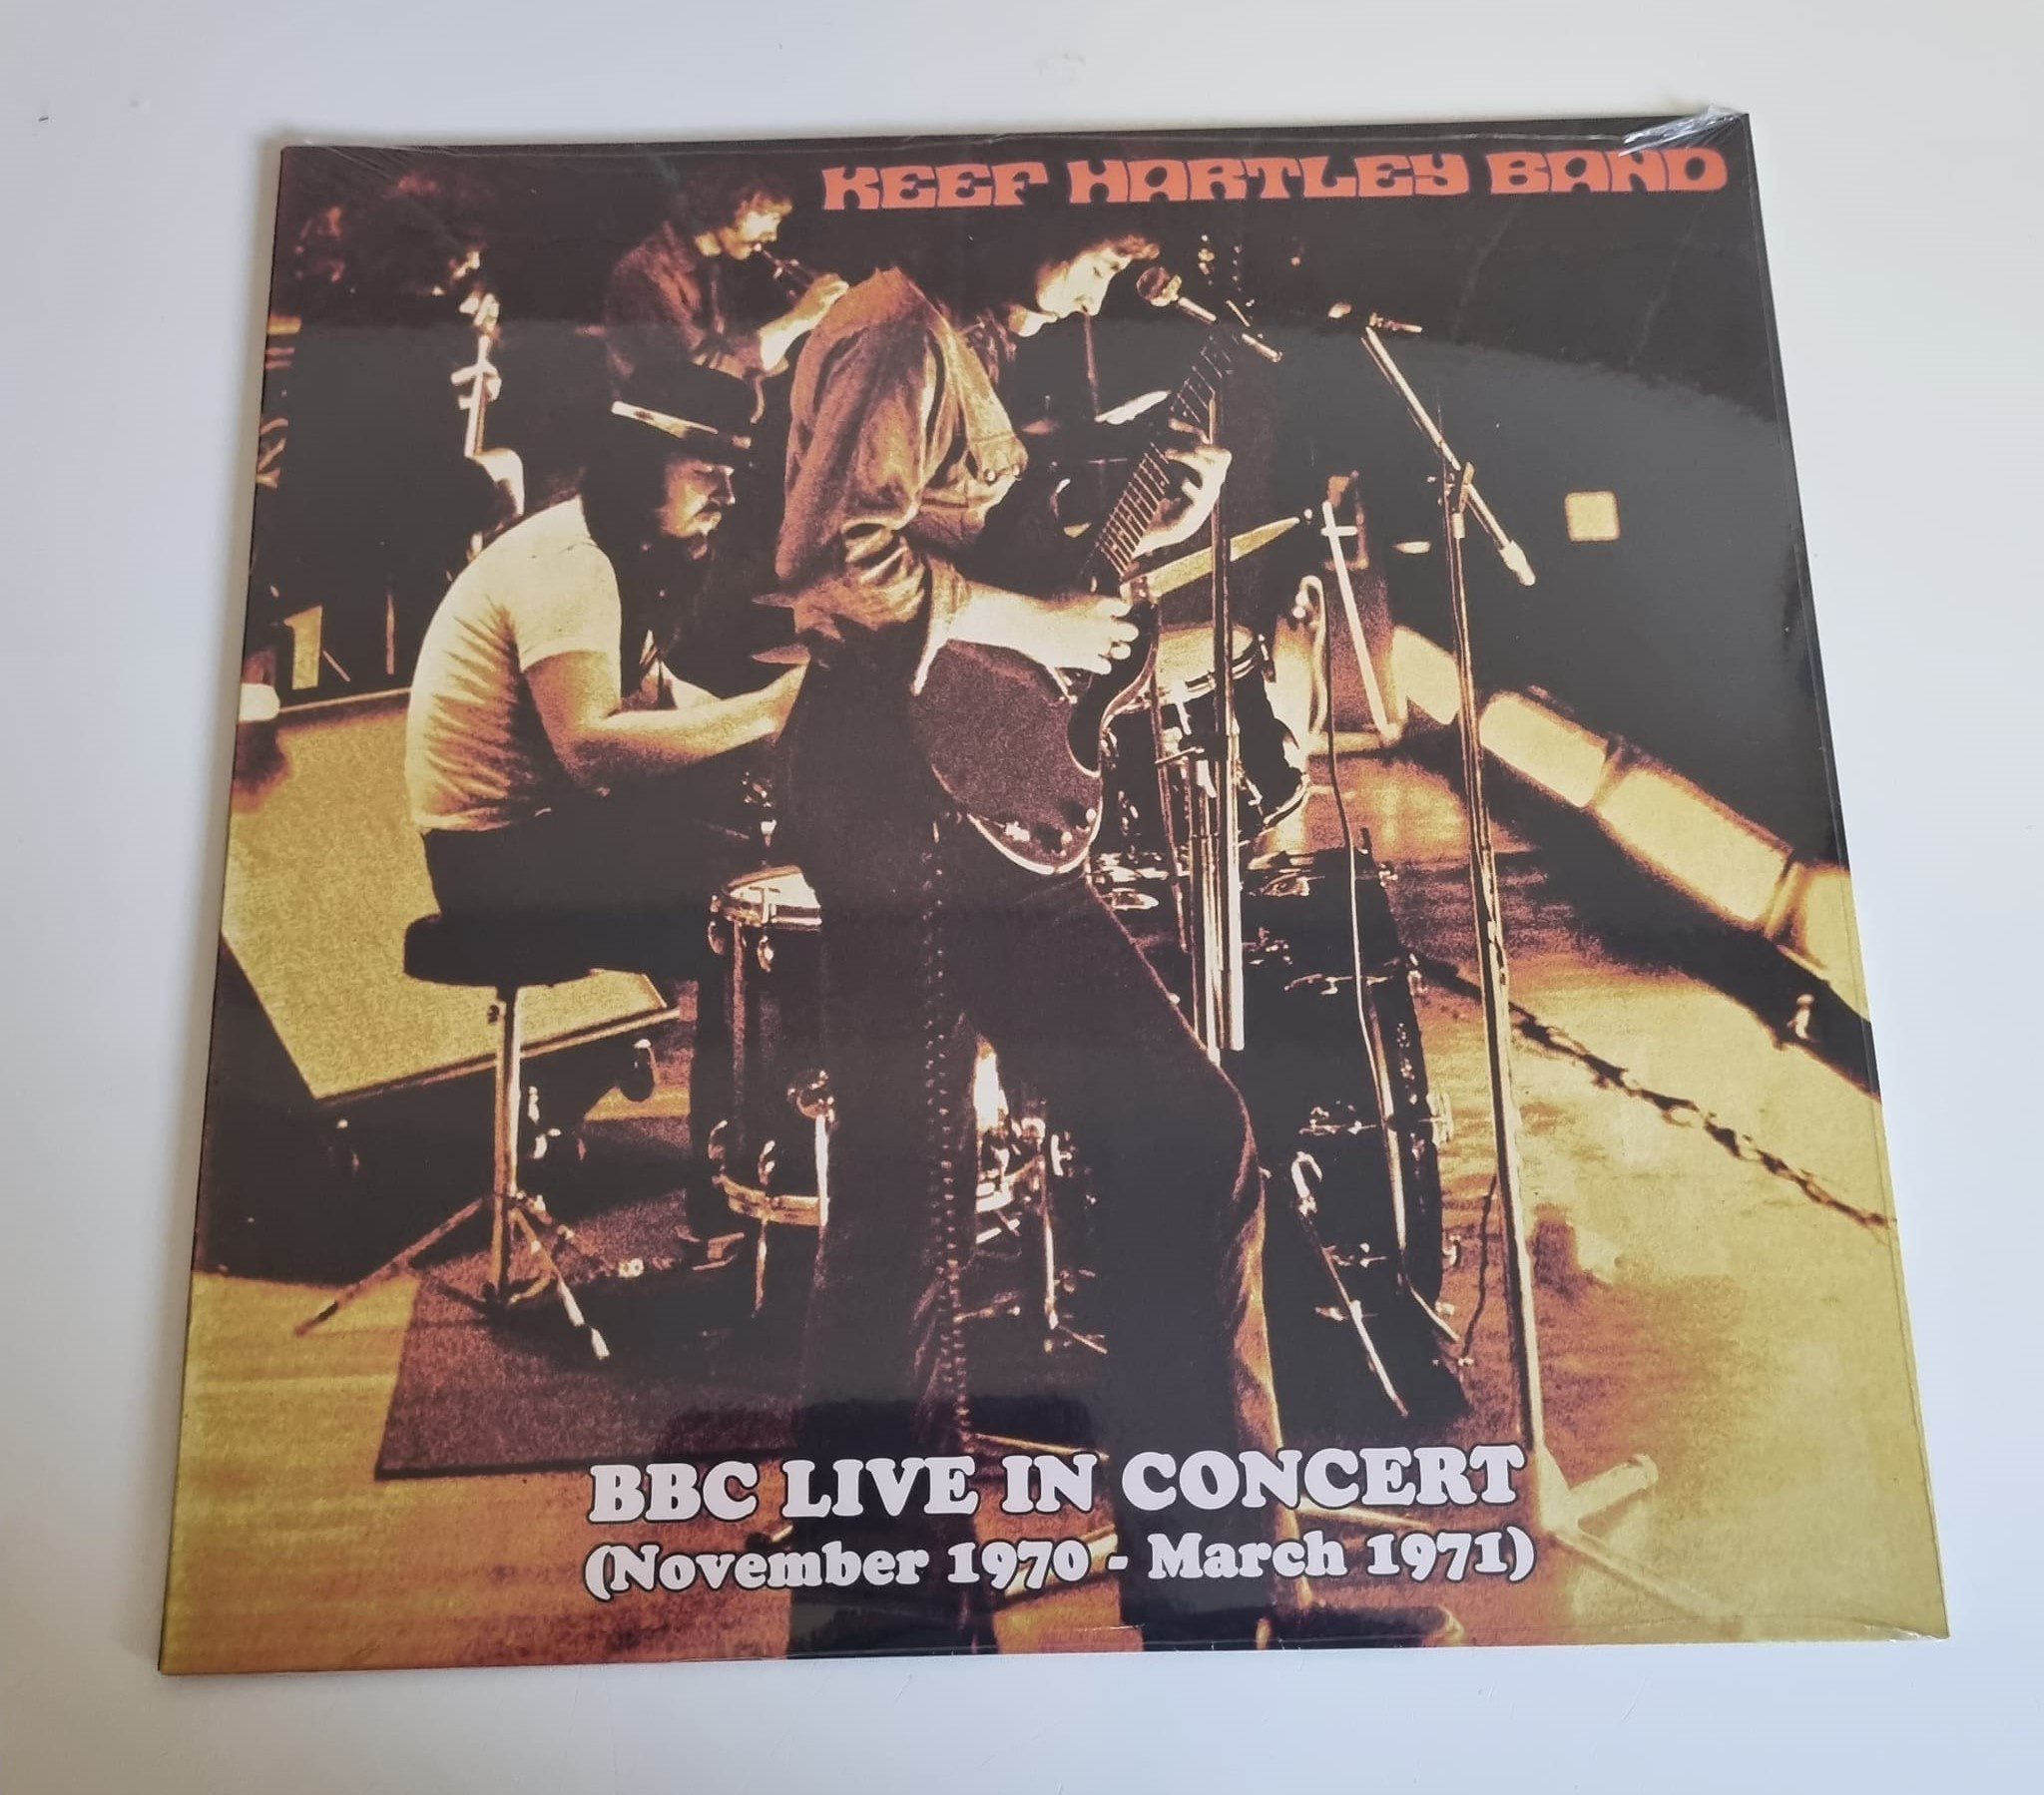 Buy this rare Keef Hartley Band record by clicking here